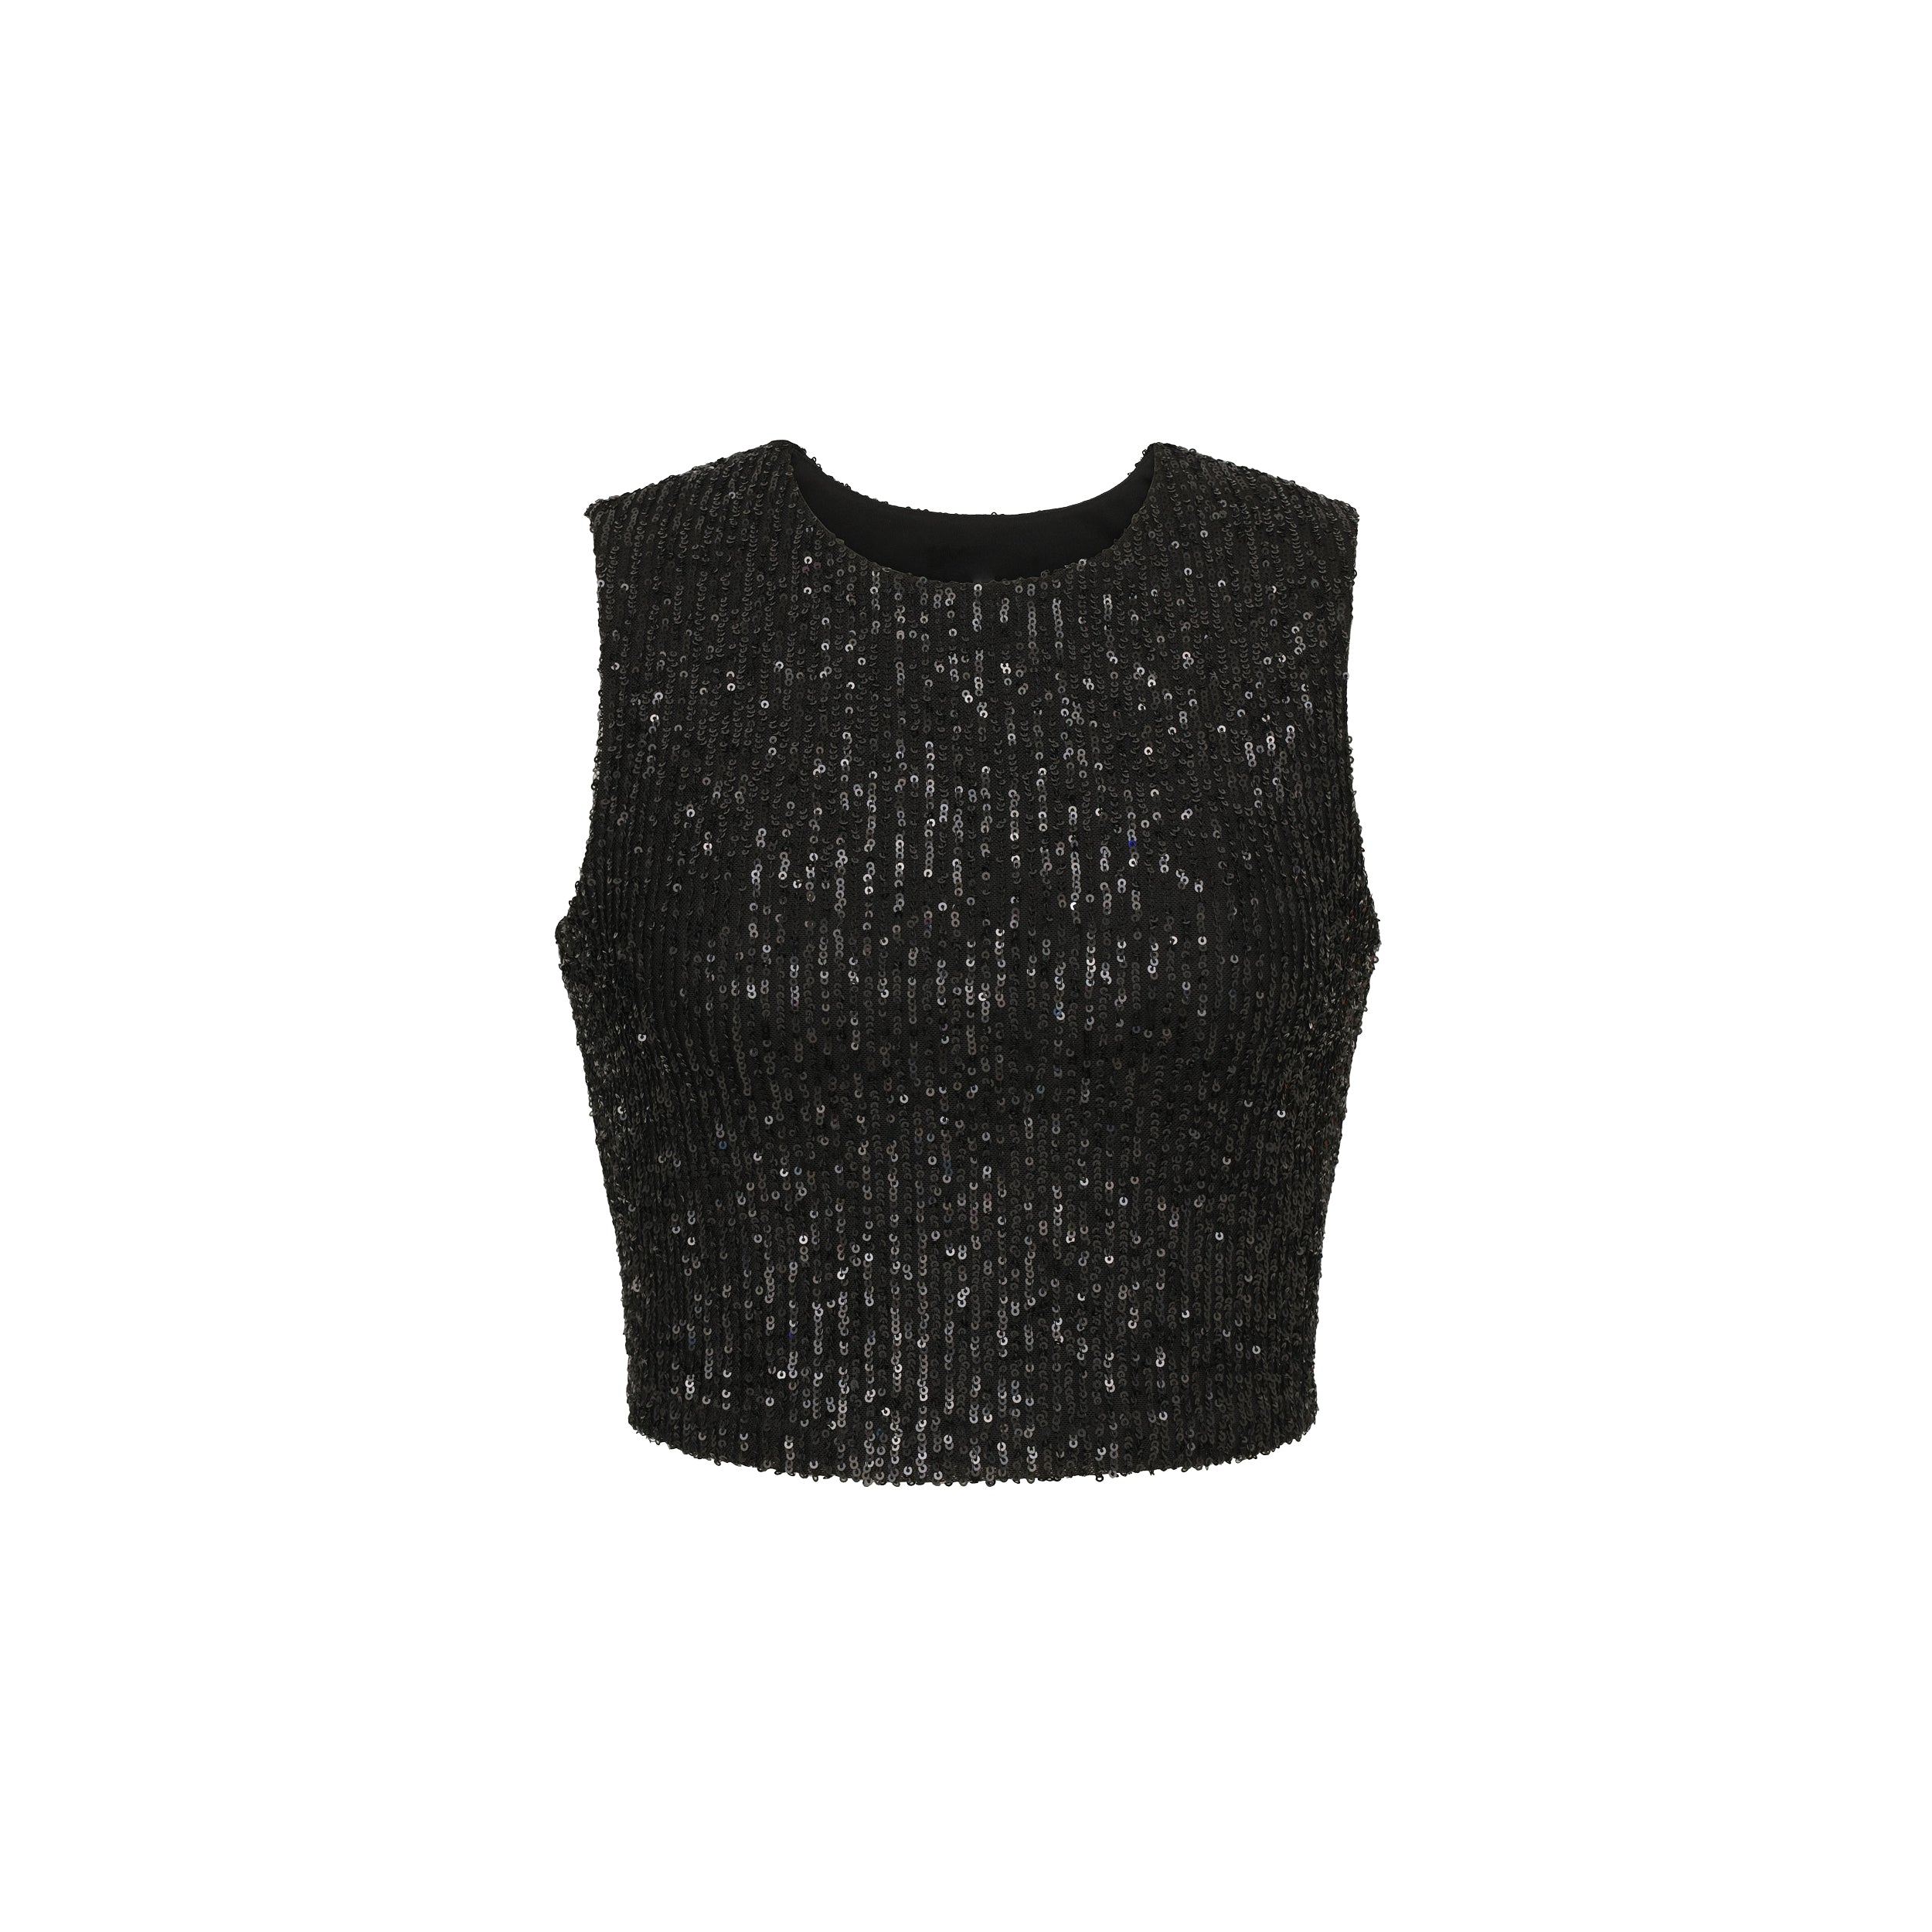 Product view of cropped black top with lustrous sequin embroidery